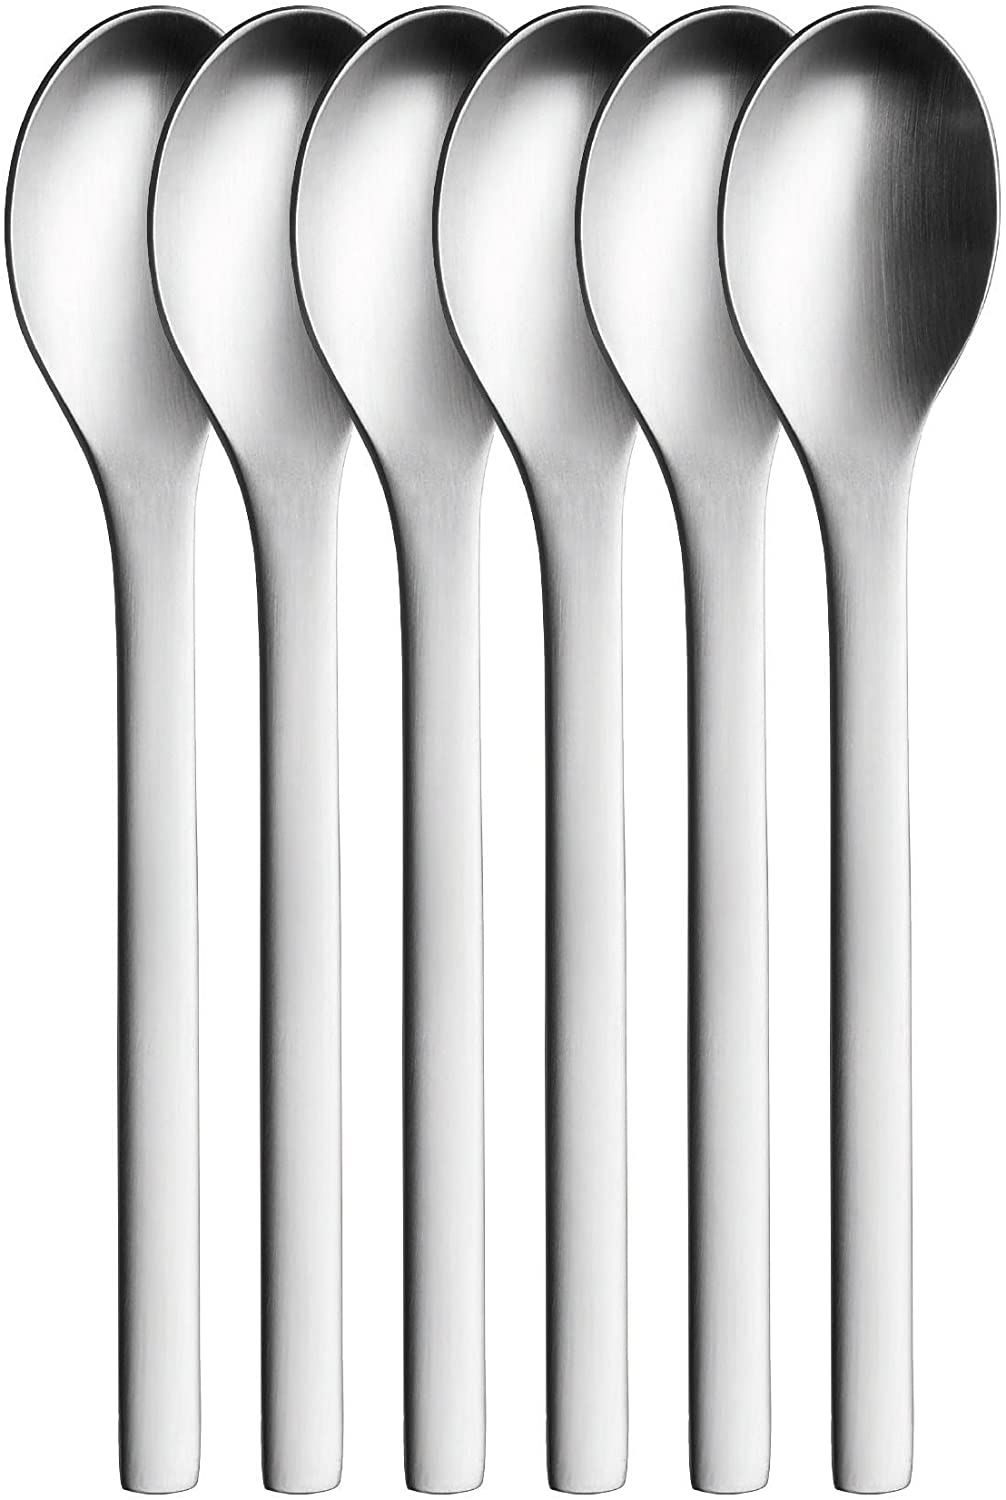 Puresigns 3020613 Art Code-3020613 6 Pieces One Extra Coffee Spoon Set